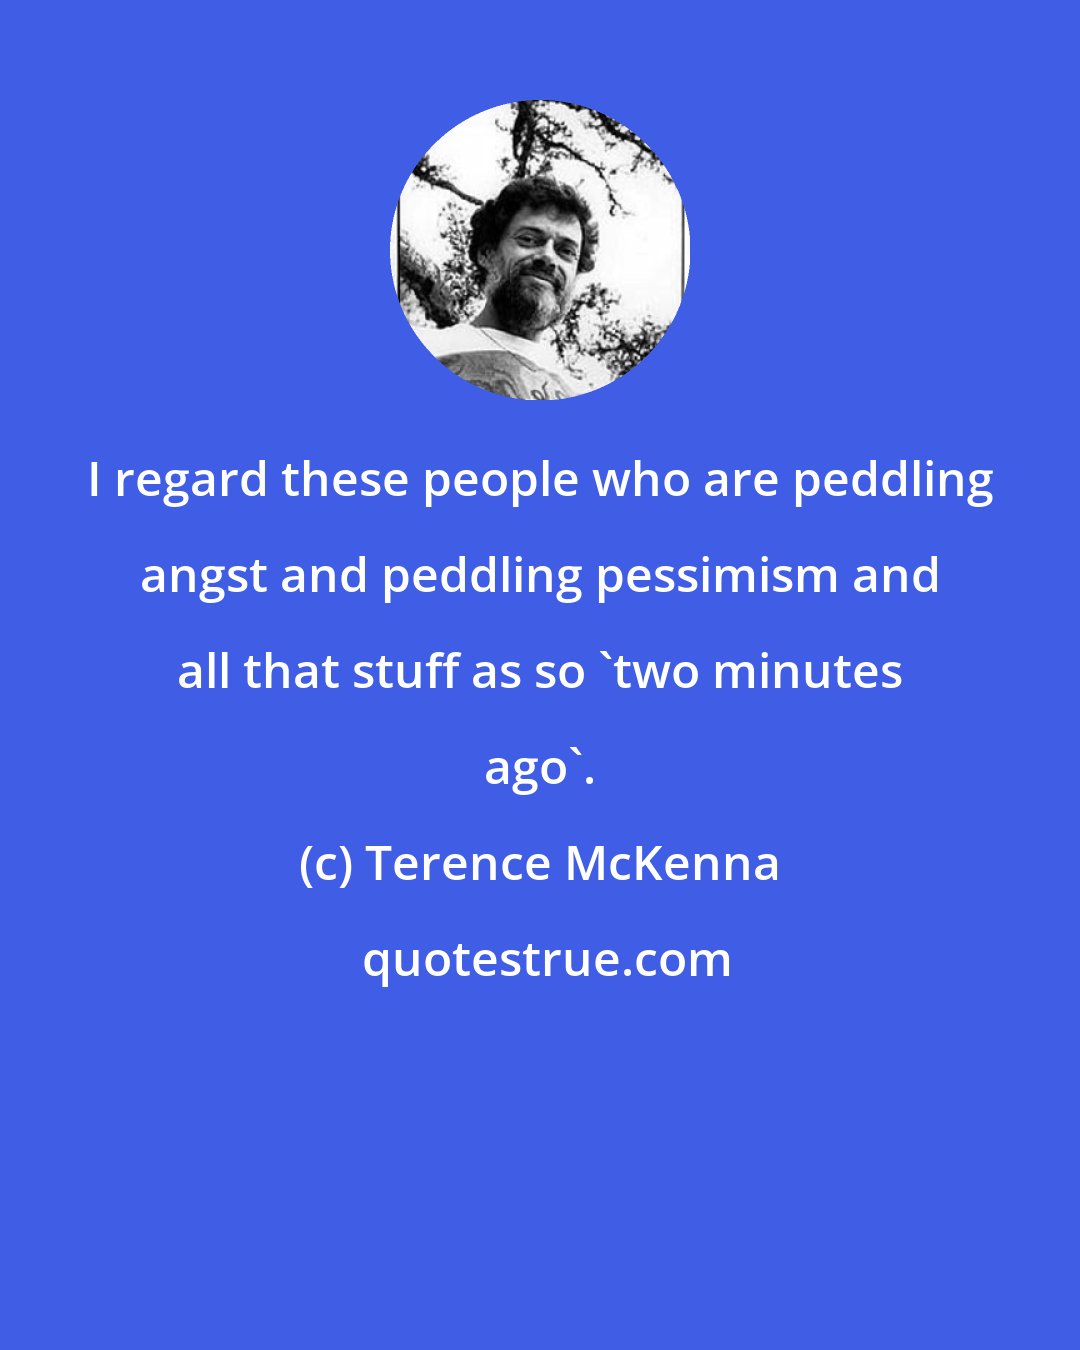 Terence McKenna: I regard these people who are peddling angst and peddling pessimism and all that stuff as so 'two minutes ago'.